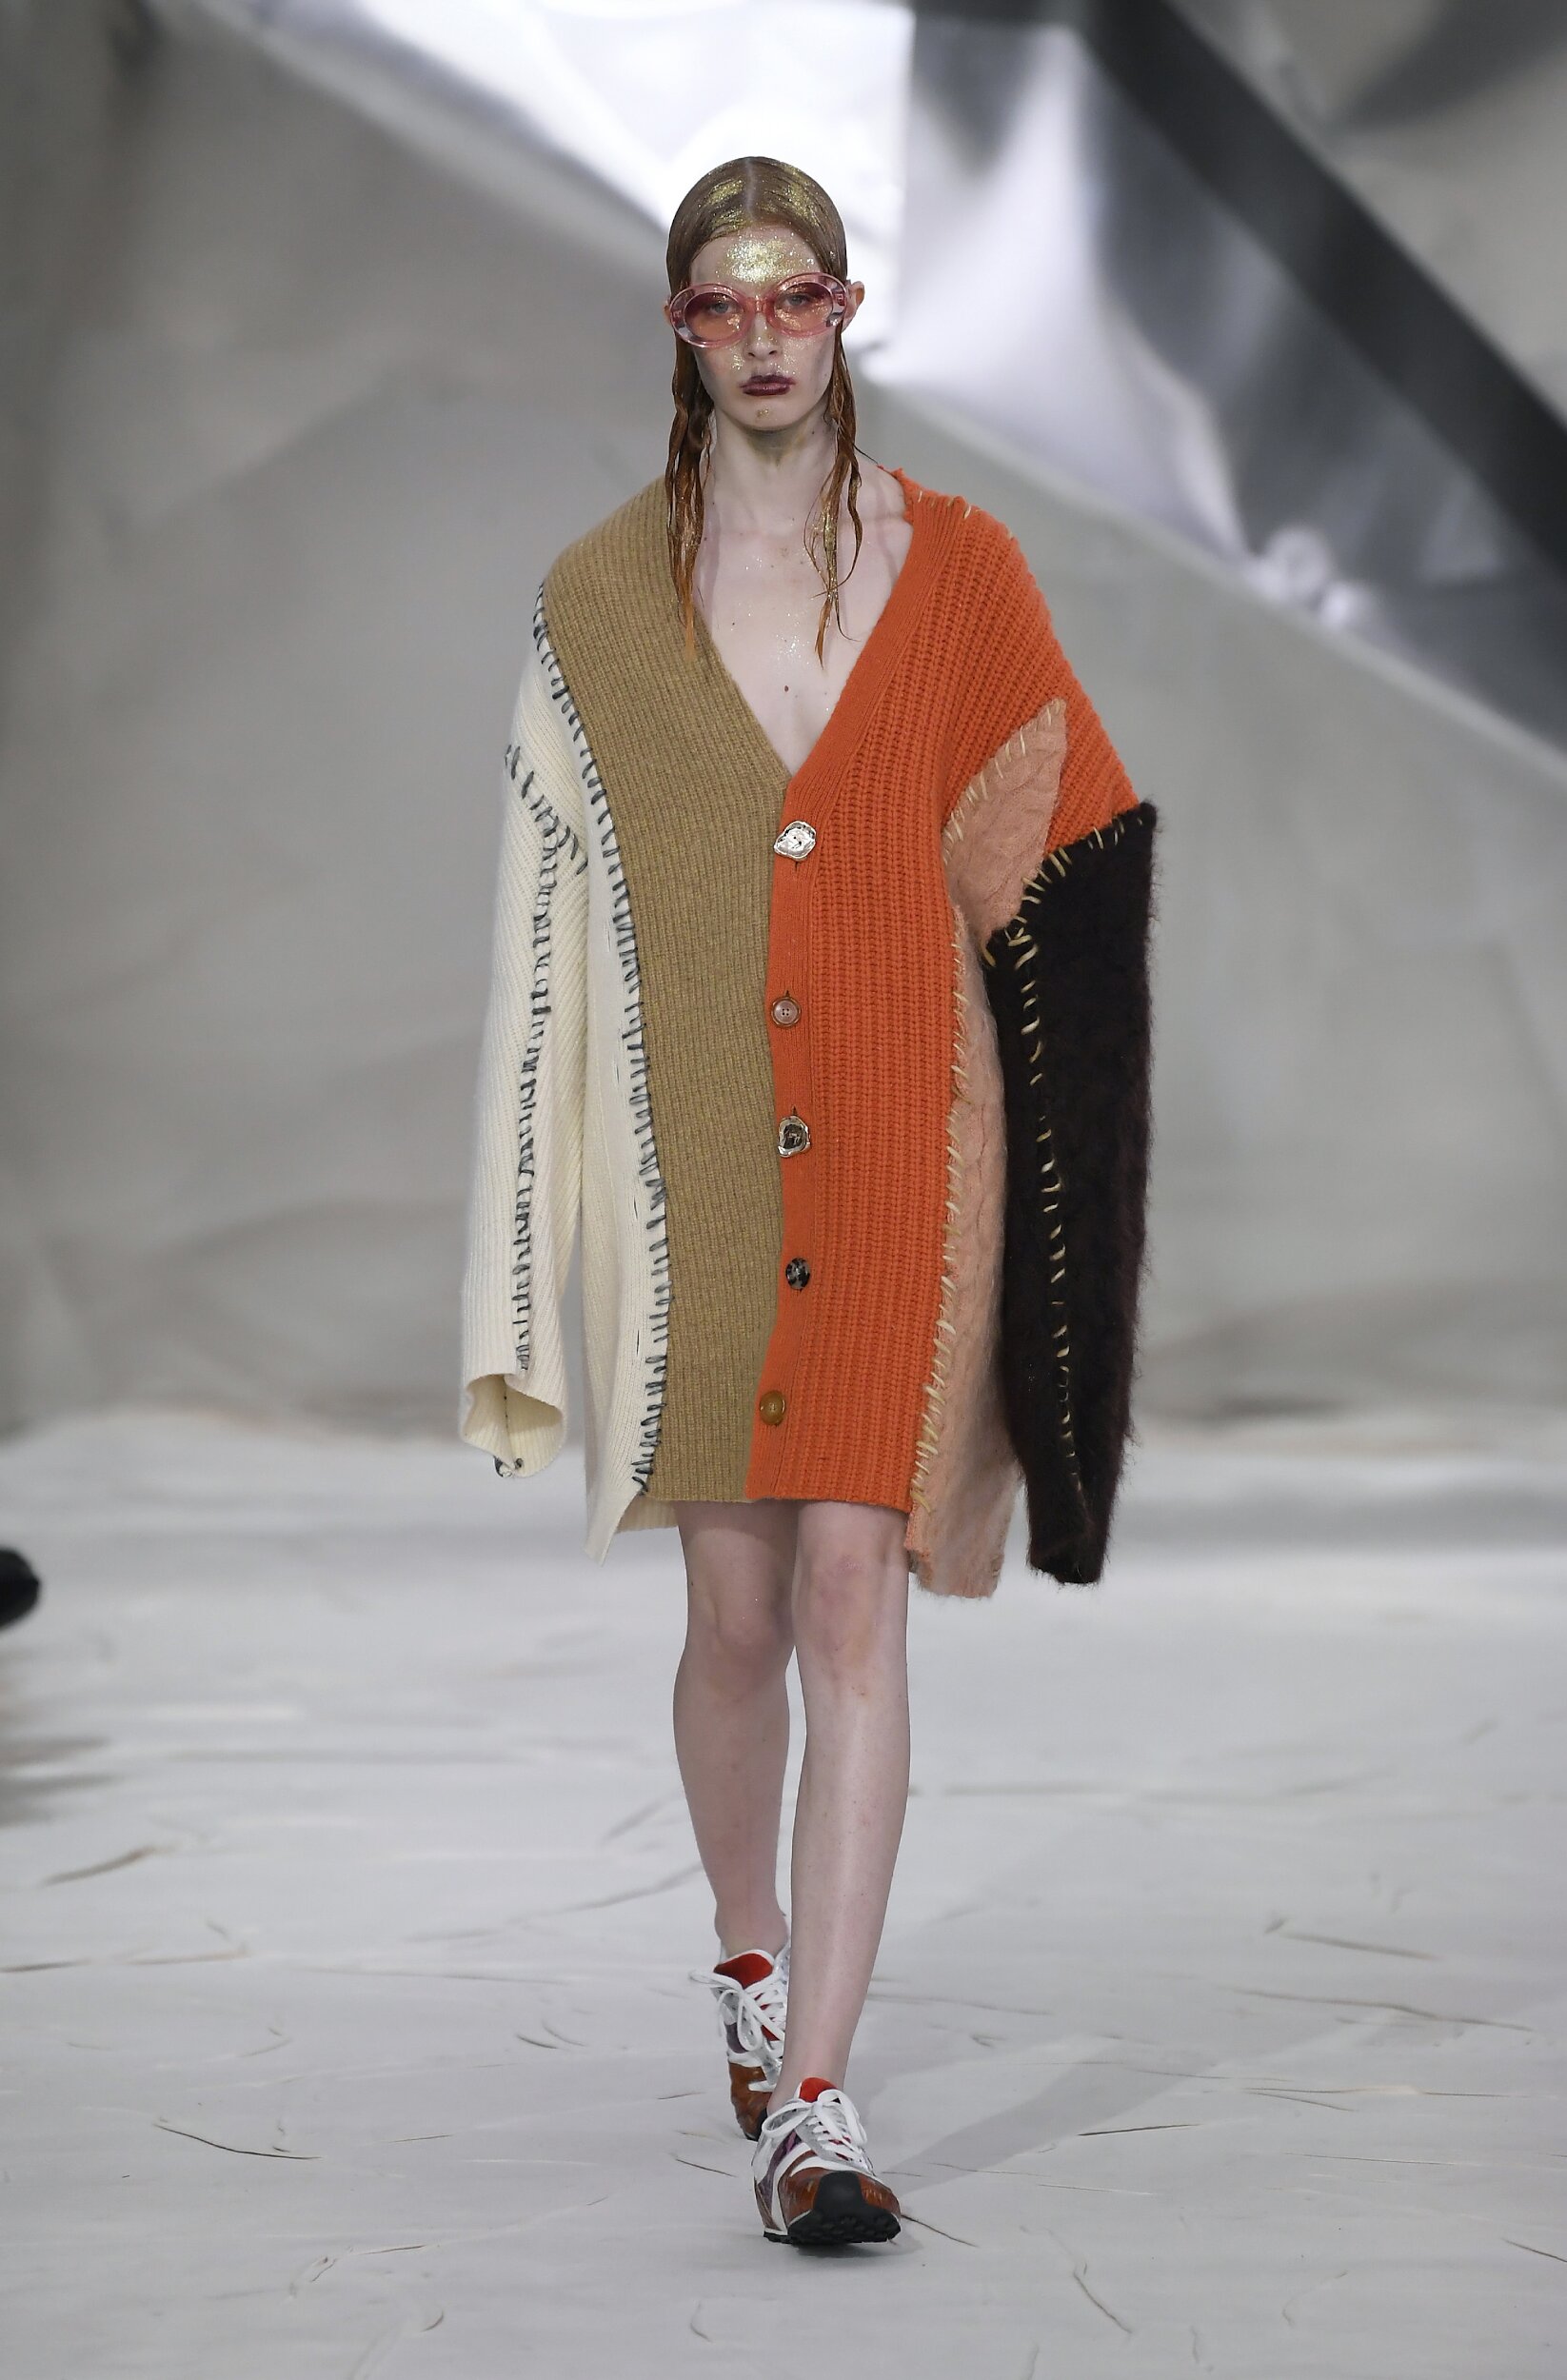 Marni Women's Collection 2020 21